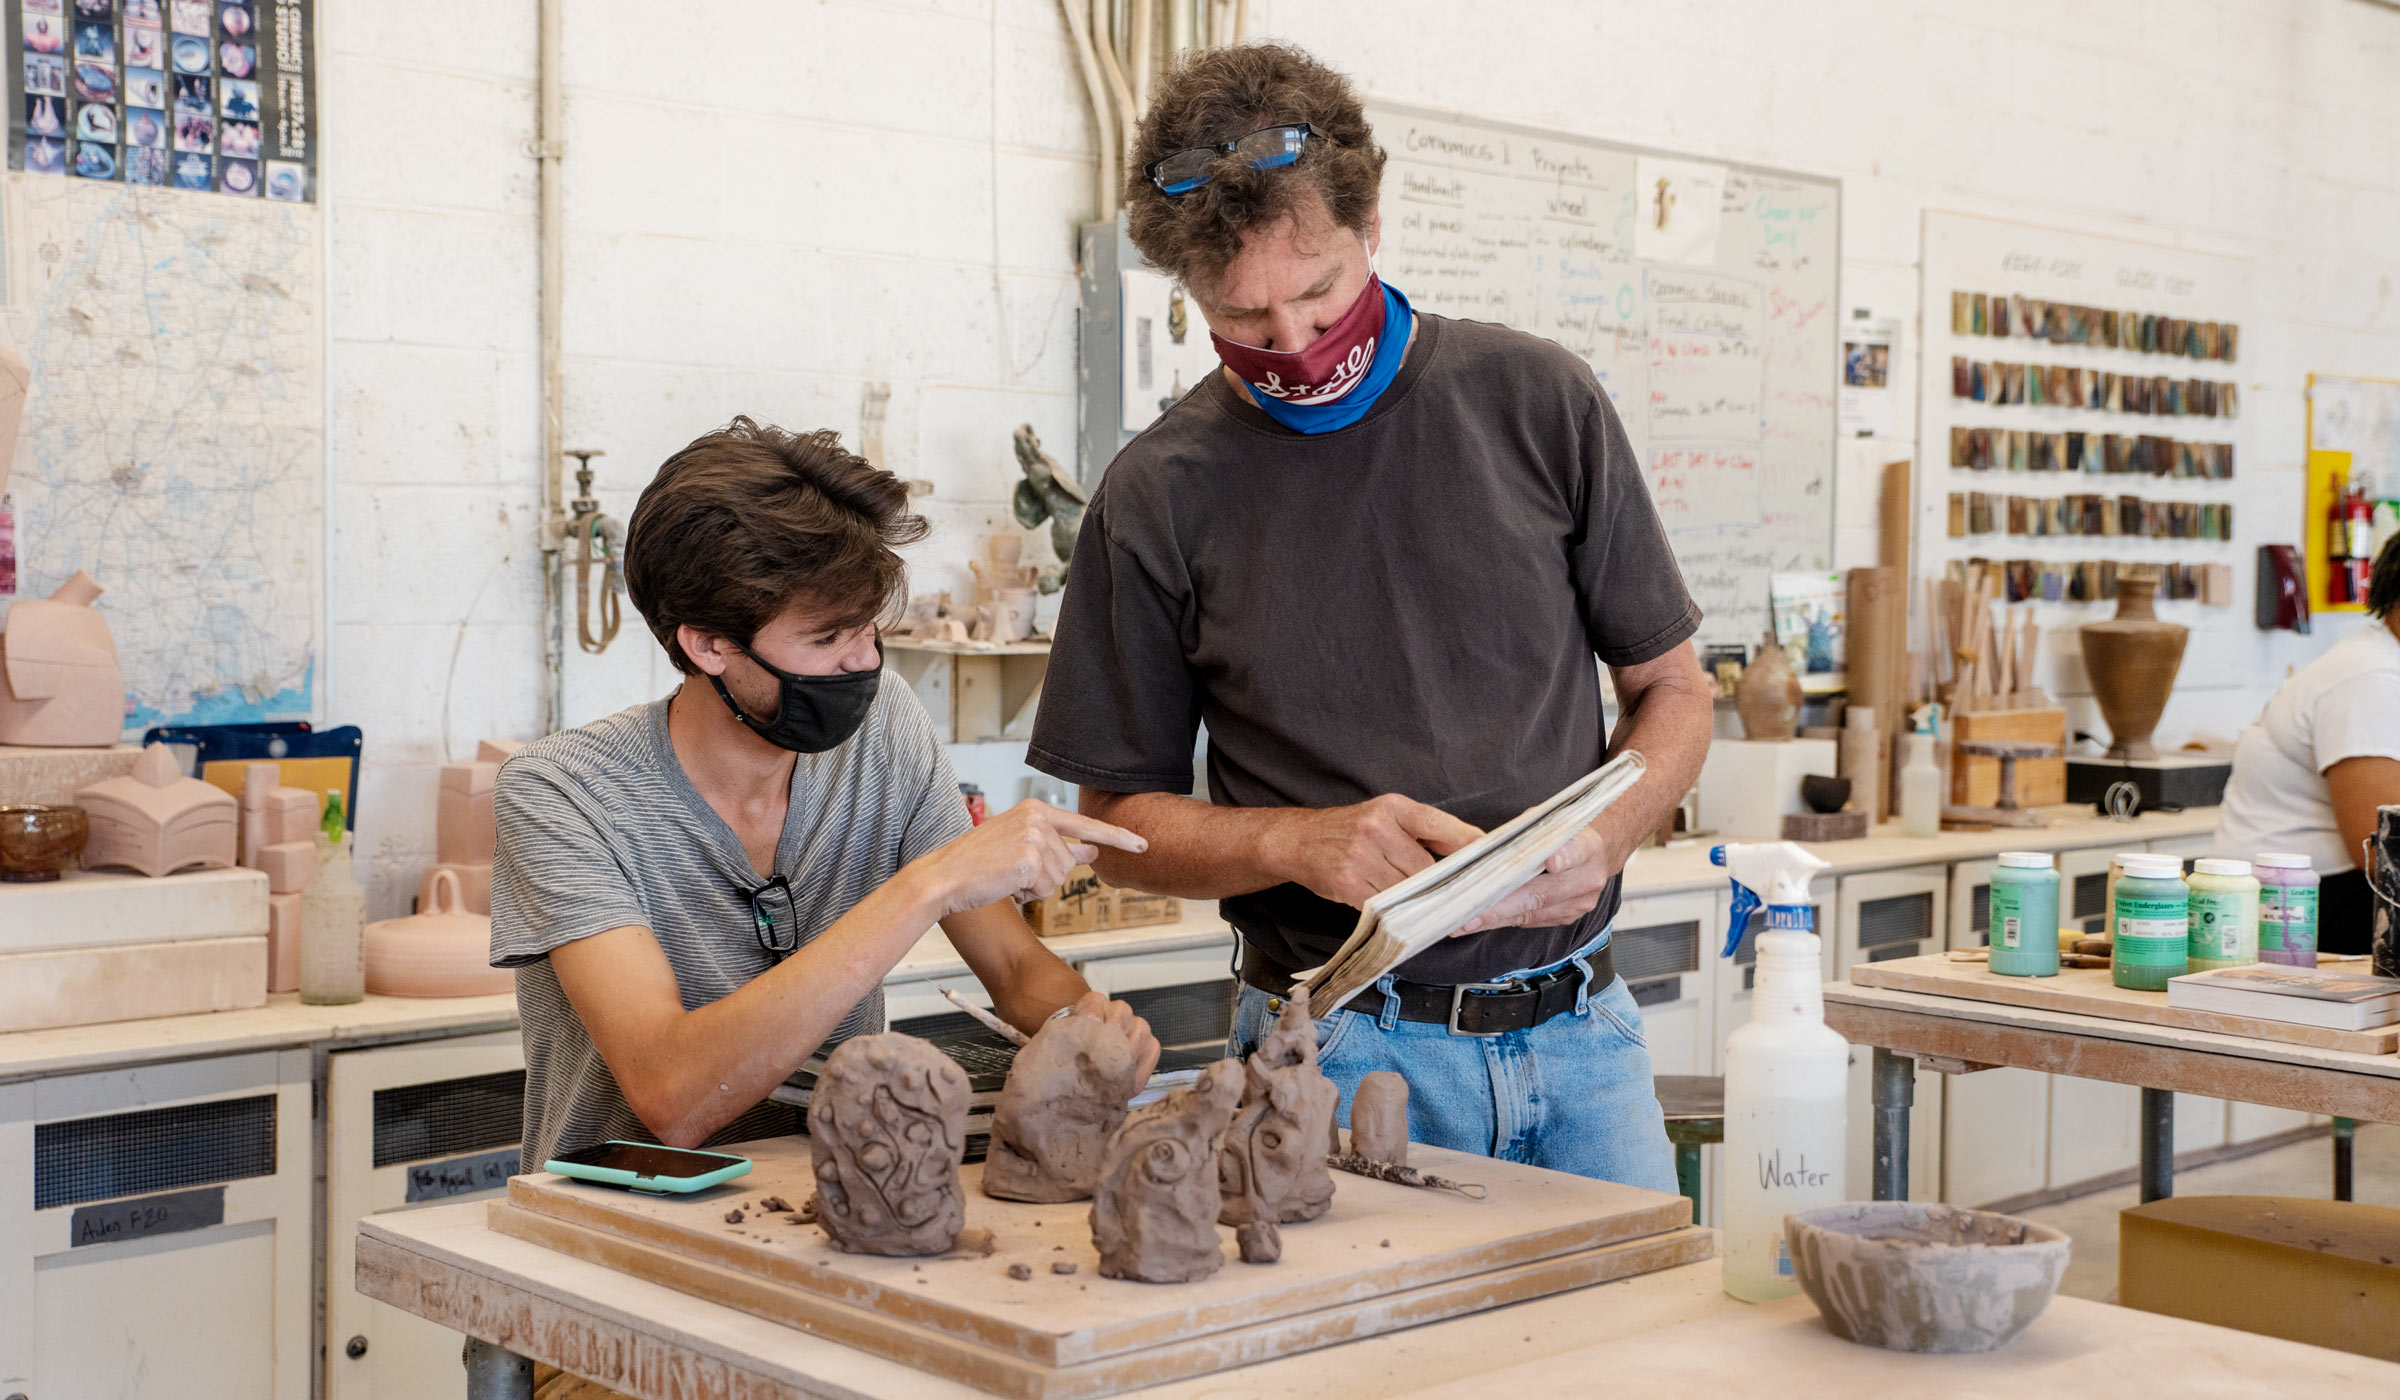 Professor Robert Long helps student Joseph MacGown with his clay project in the Howell Hall pottery studio.